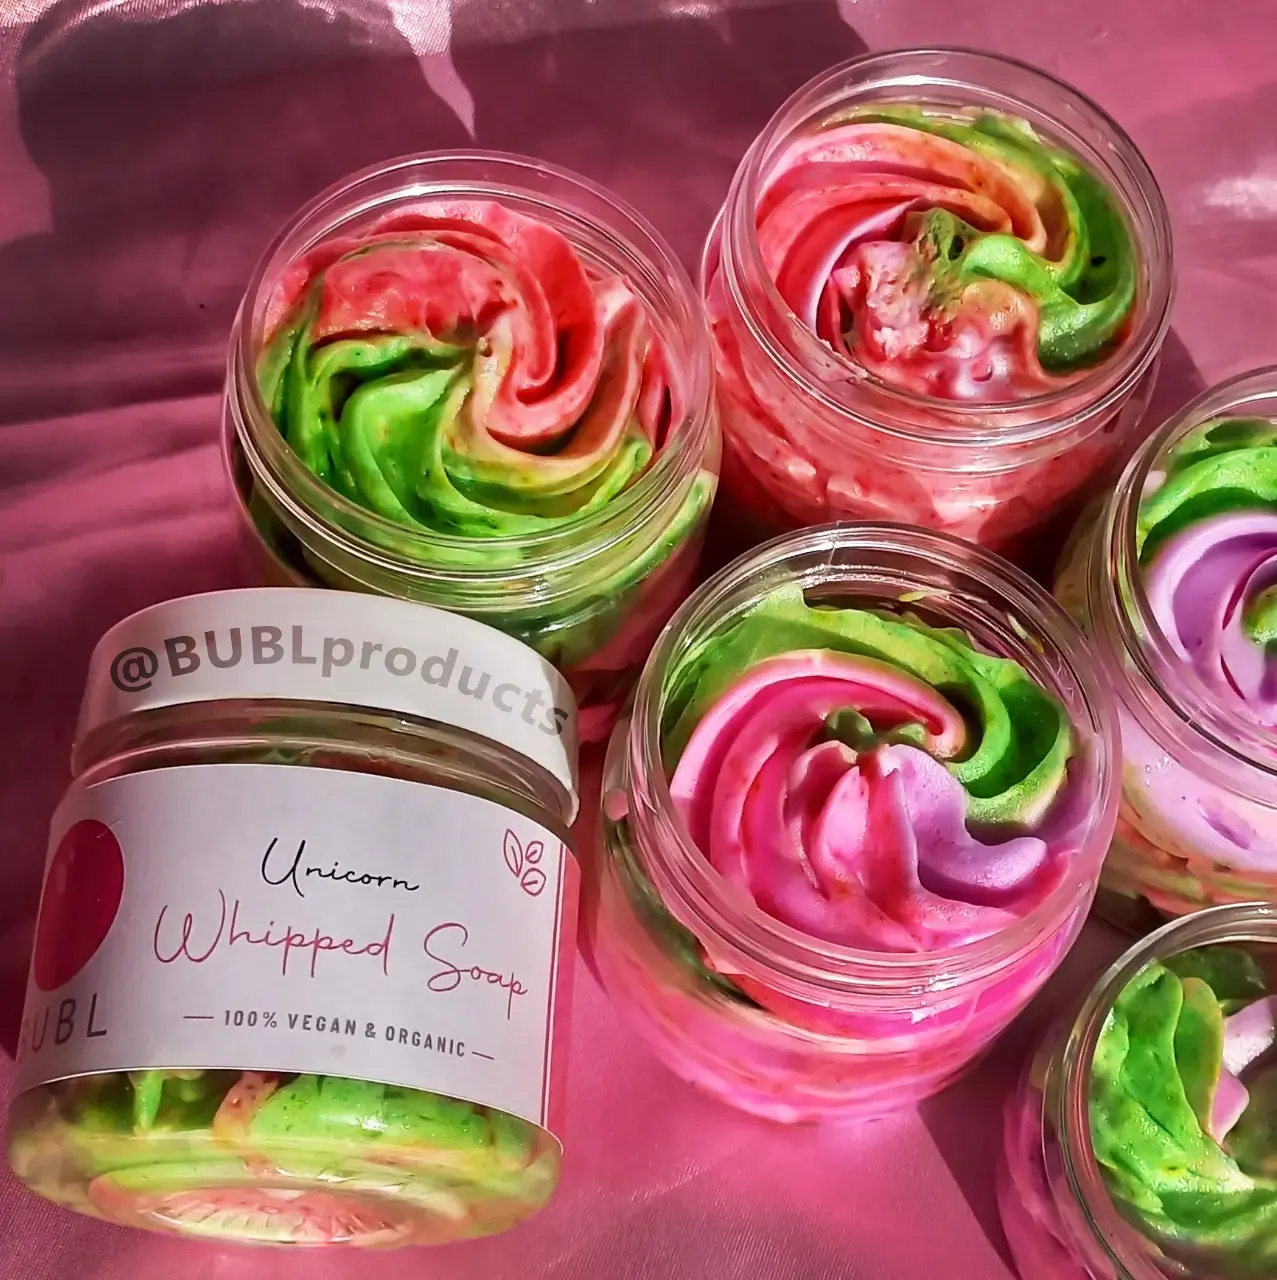 unicorn whipped soaps - bublproducts.com